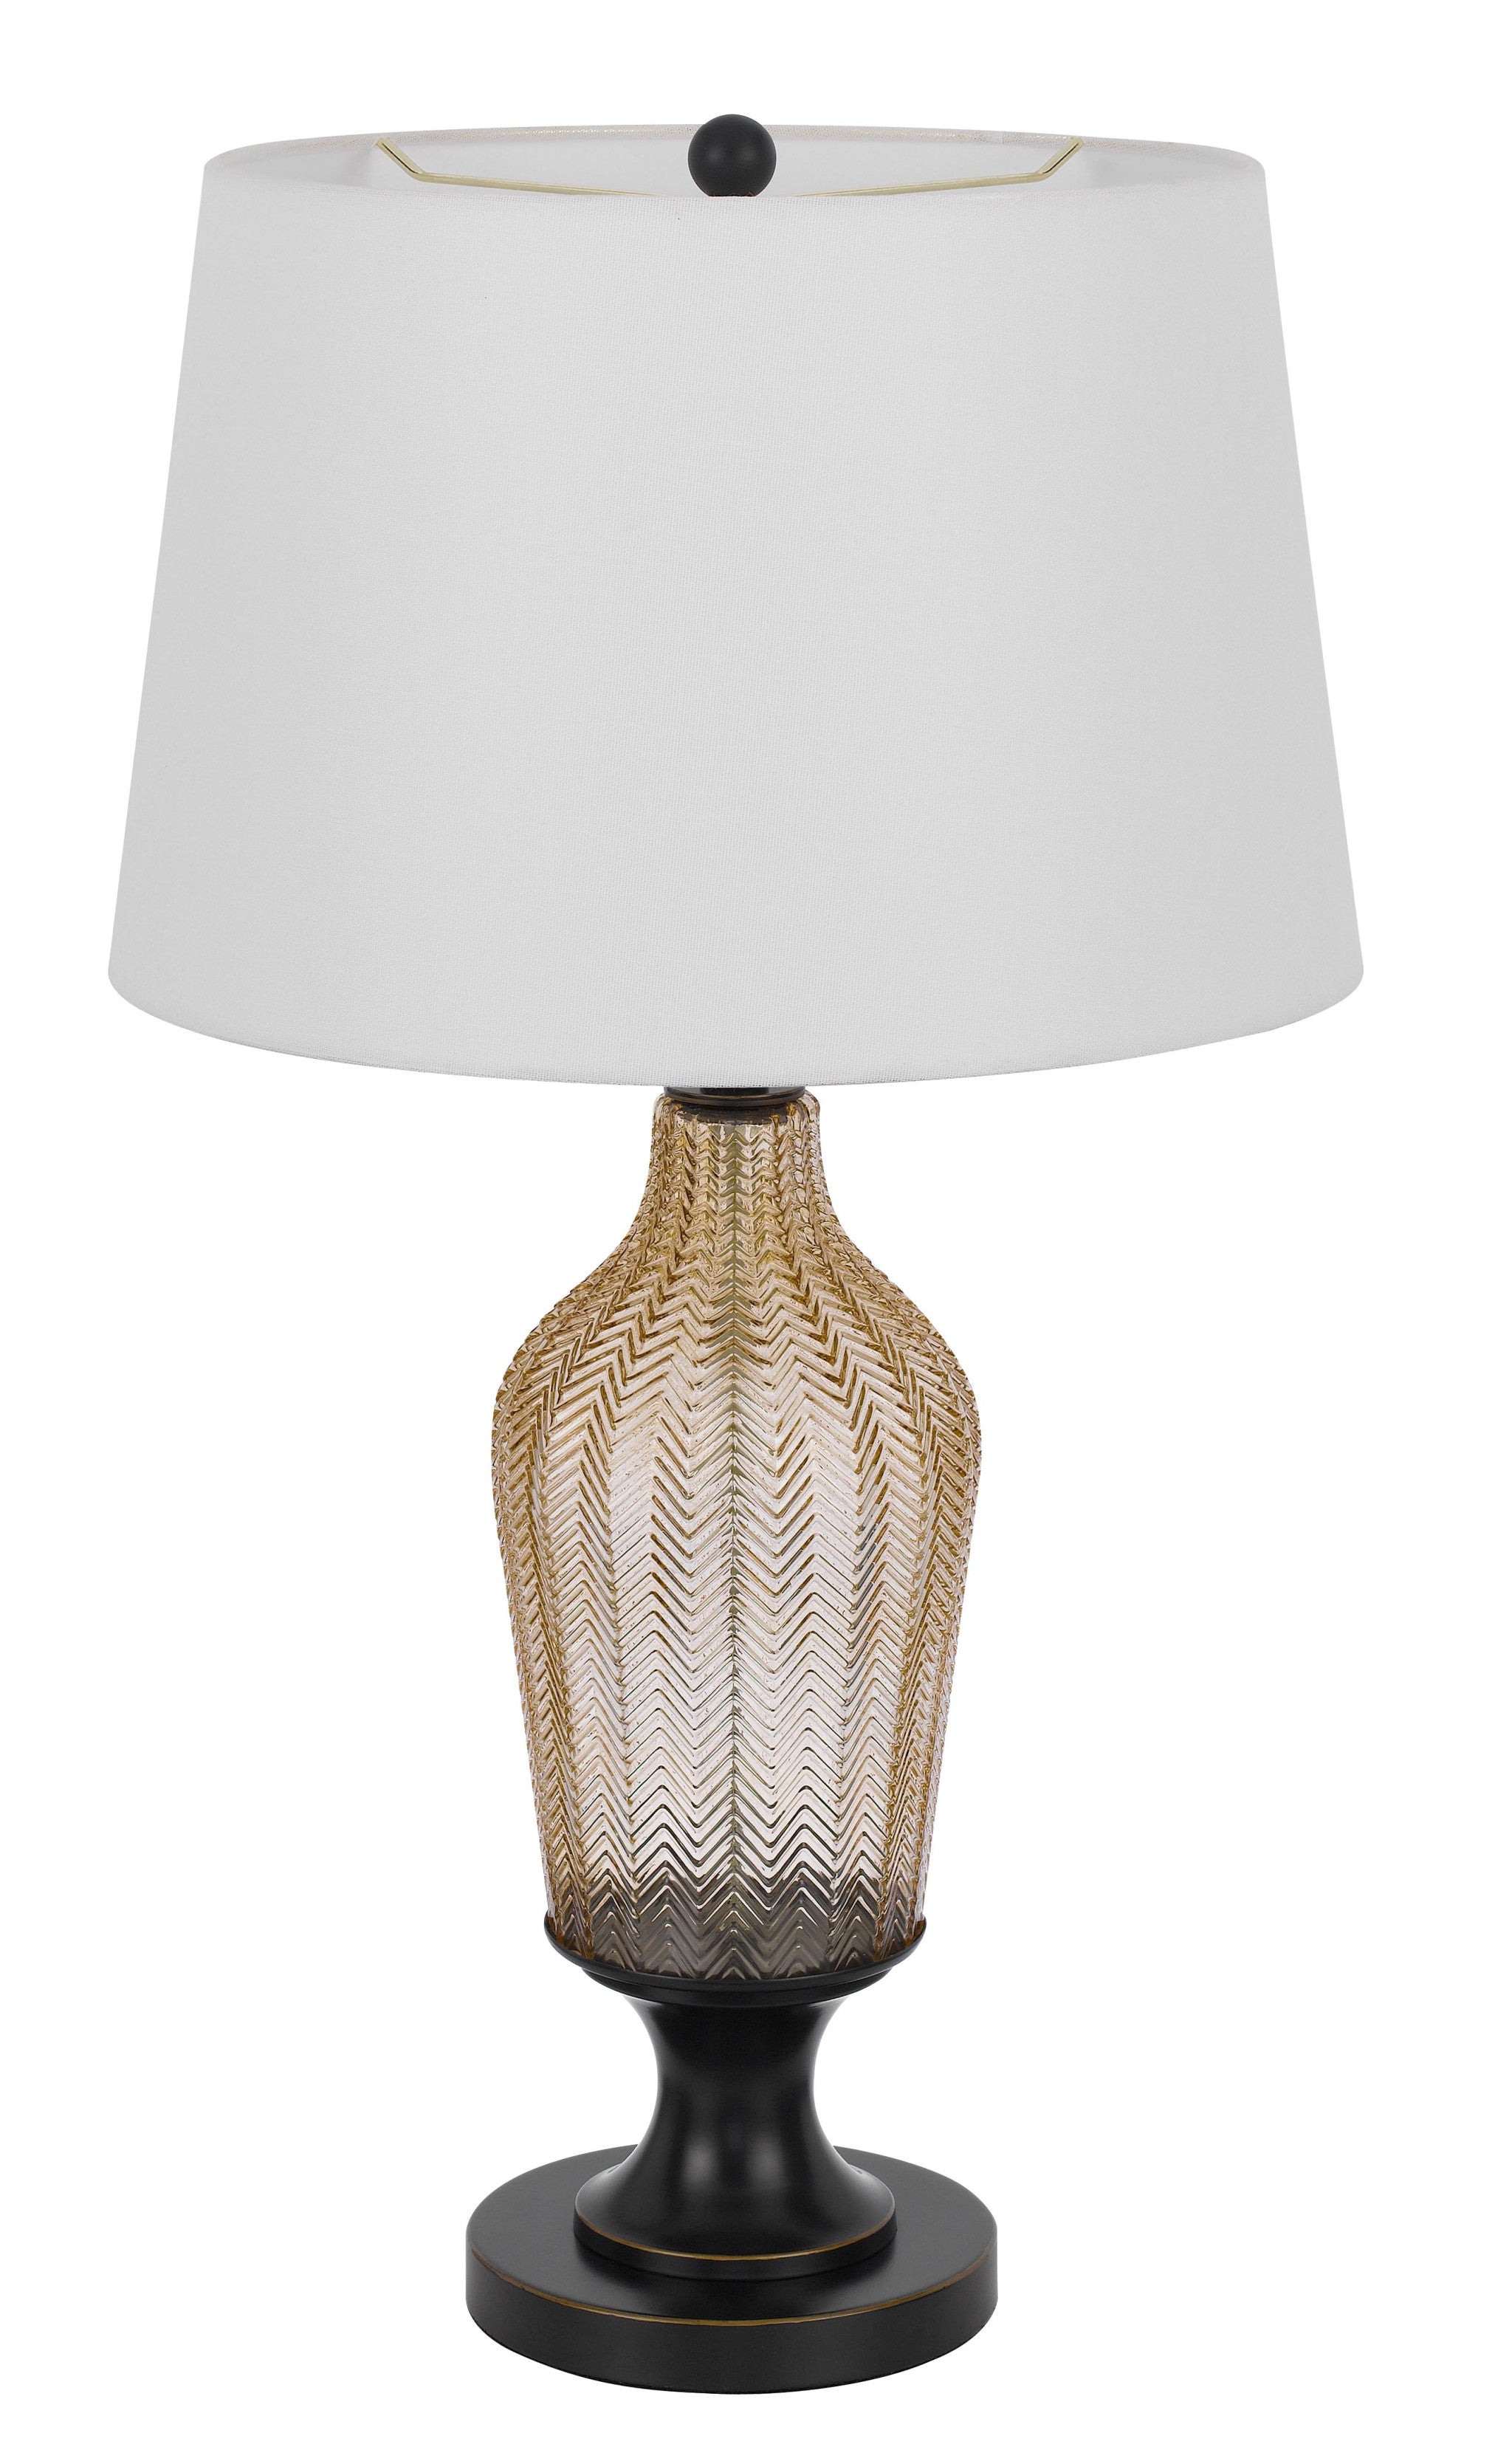 31" Bronze Glass Table Lamp With White Empire Shade